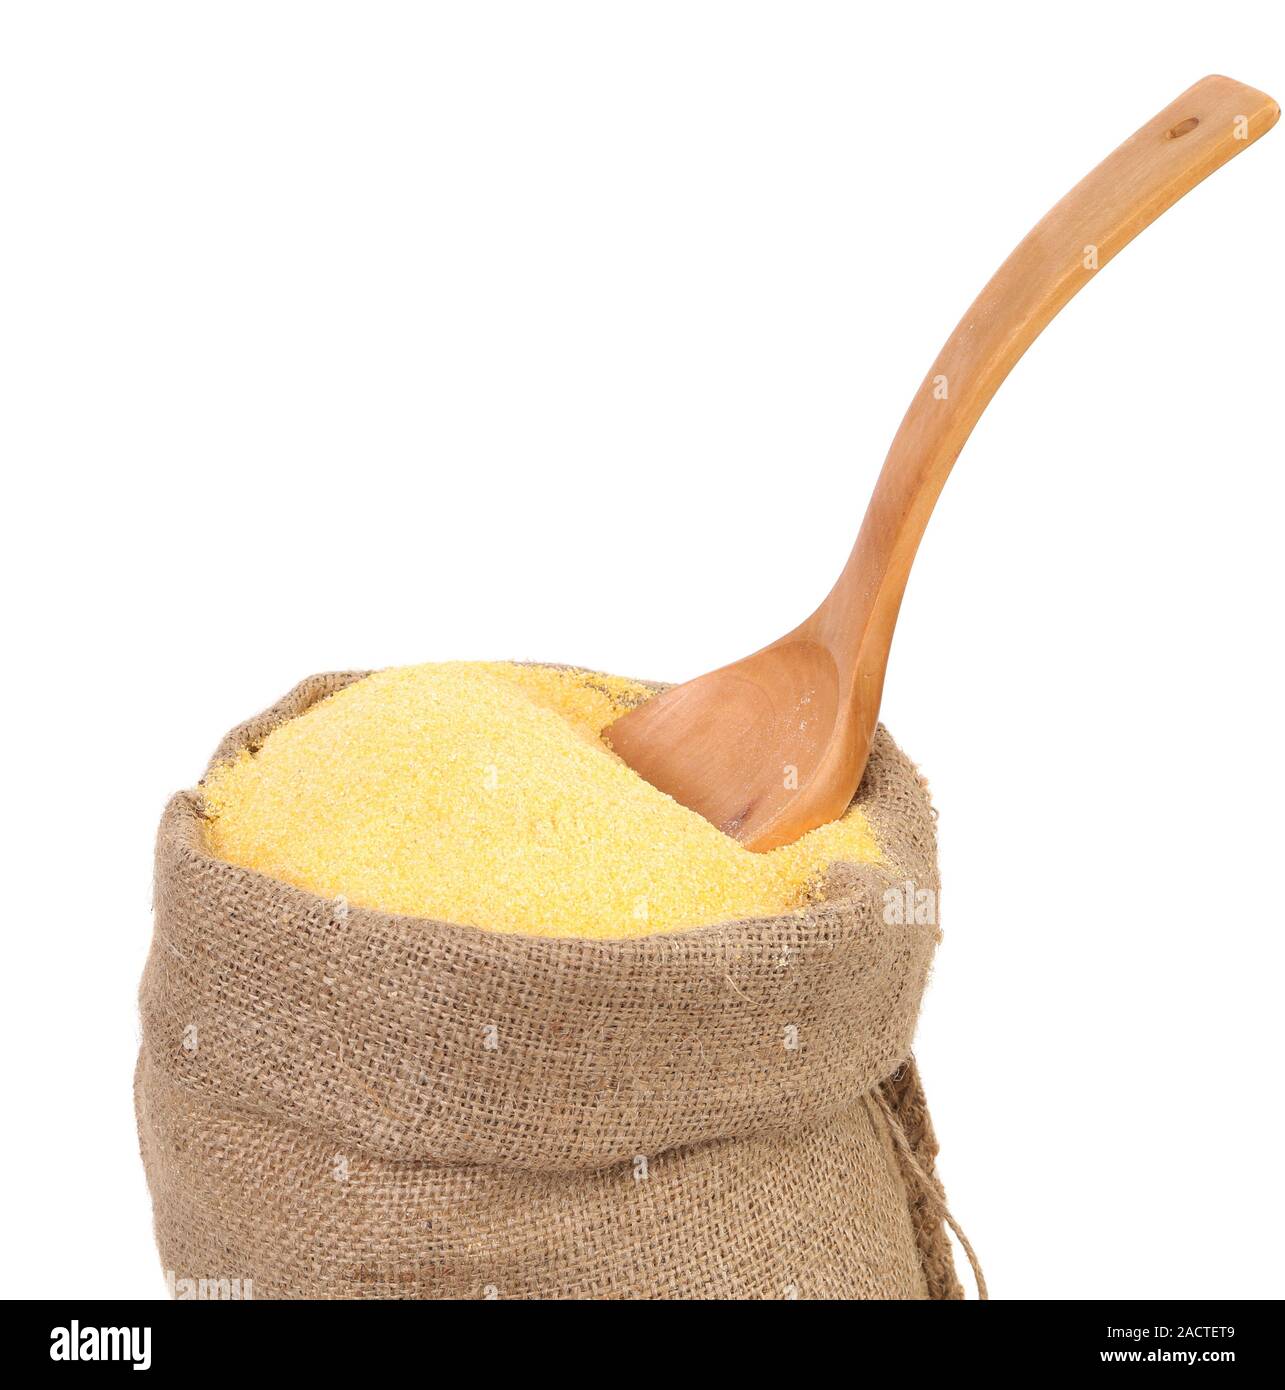 bag of ground corn and a wooden spoon Stock Photo